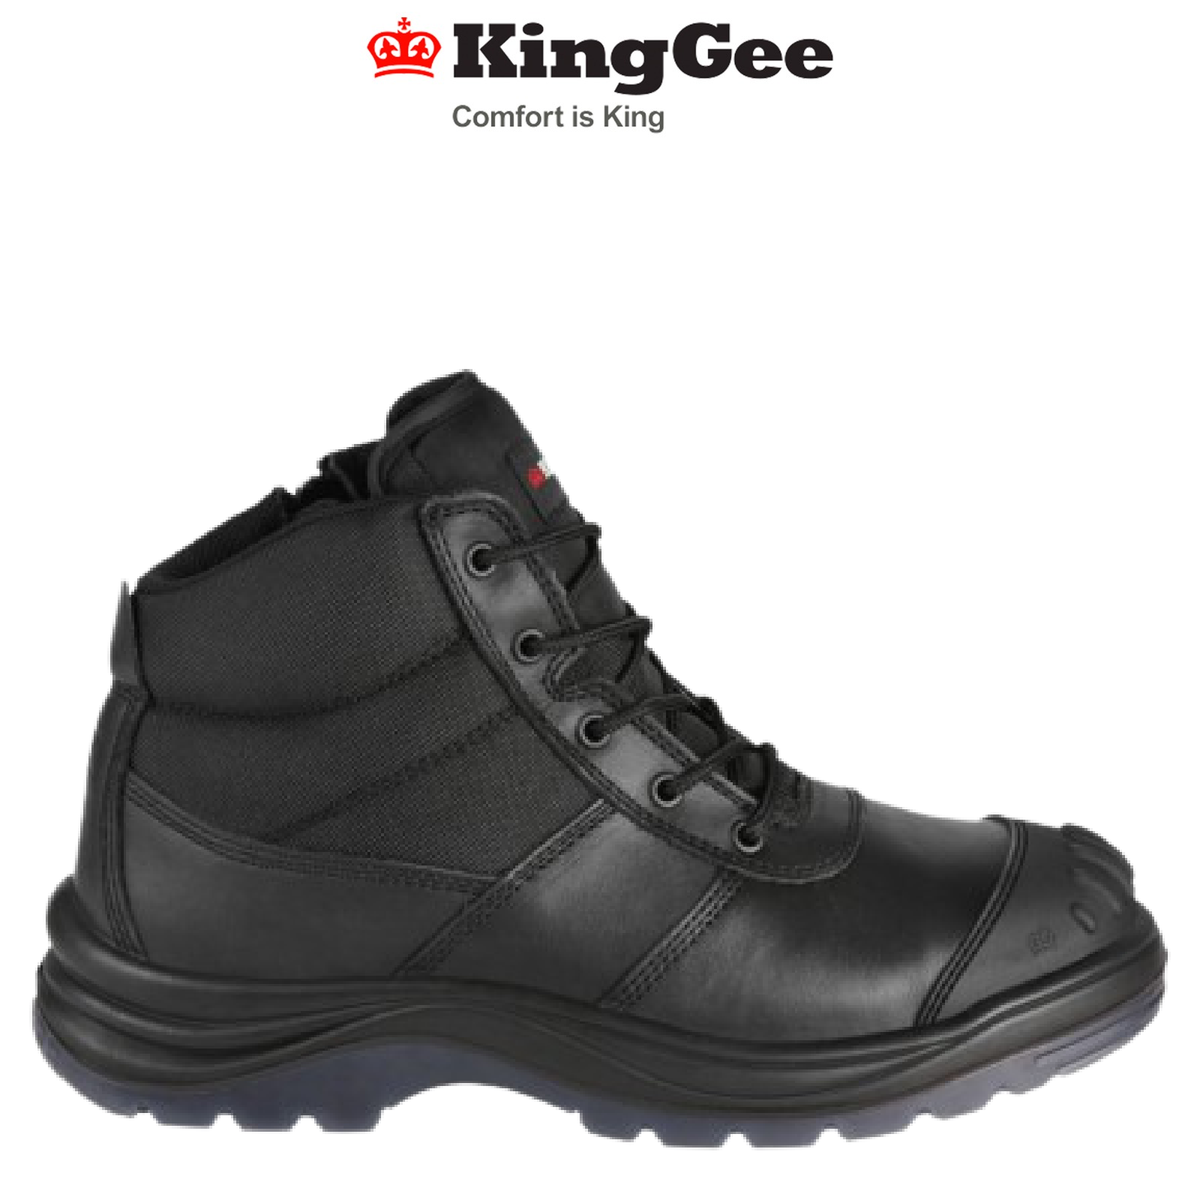 KingGee Mens Tradie Boot Breathable Leather Work Safety Water Resistant K27150